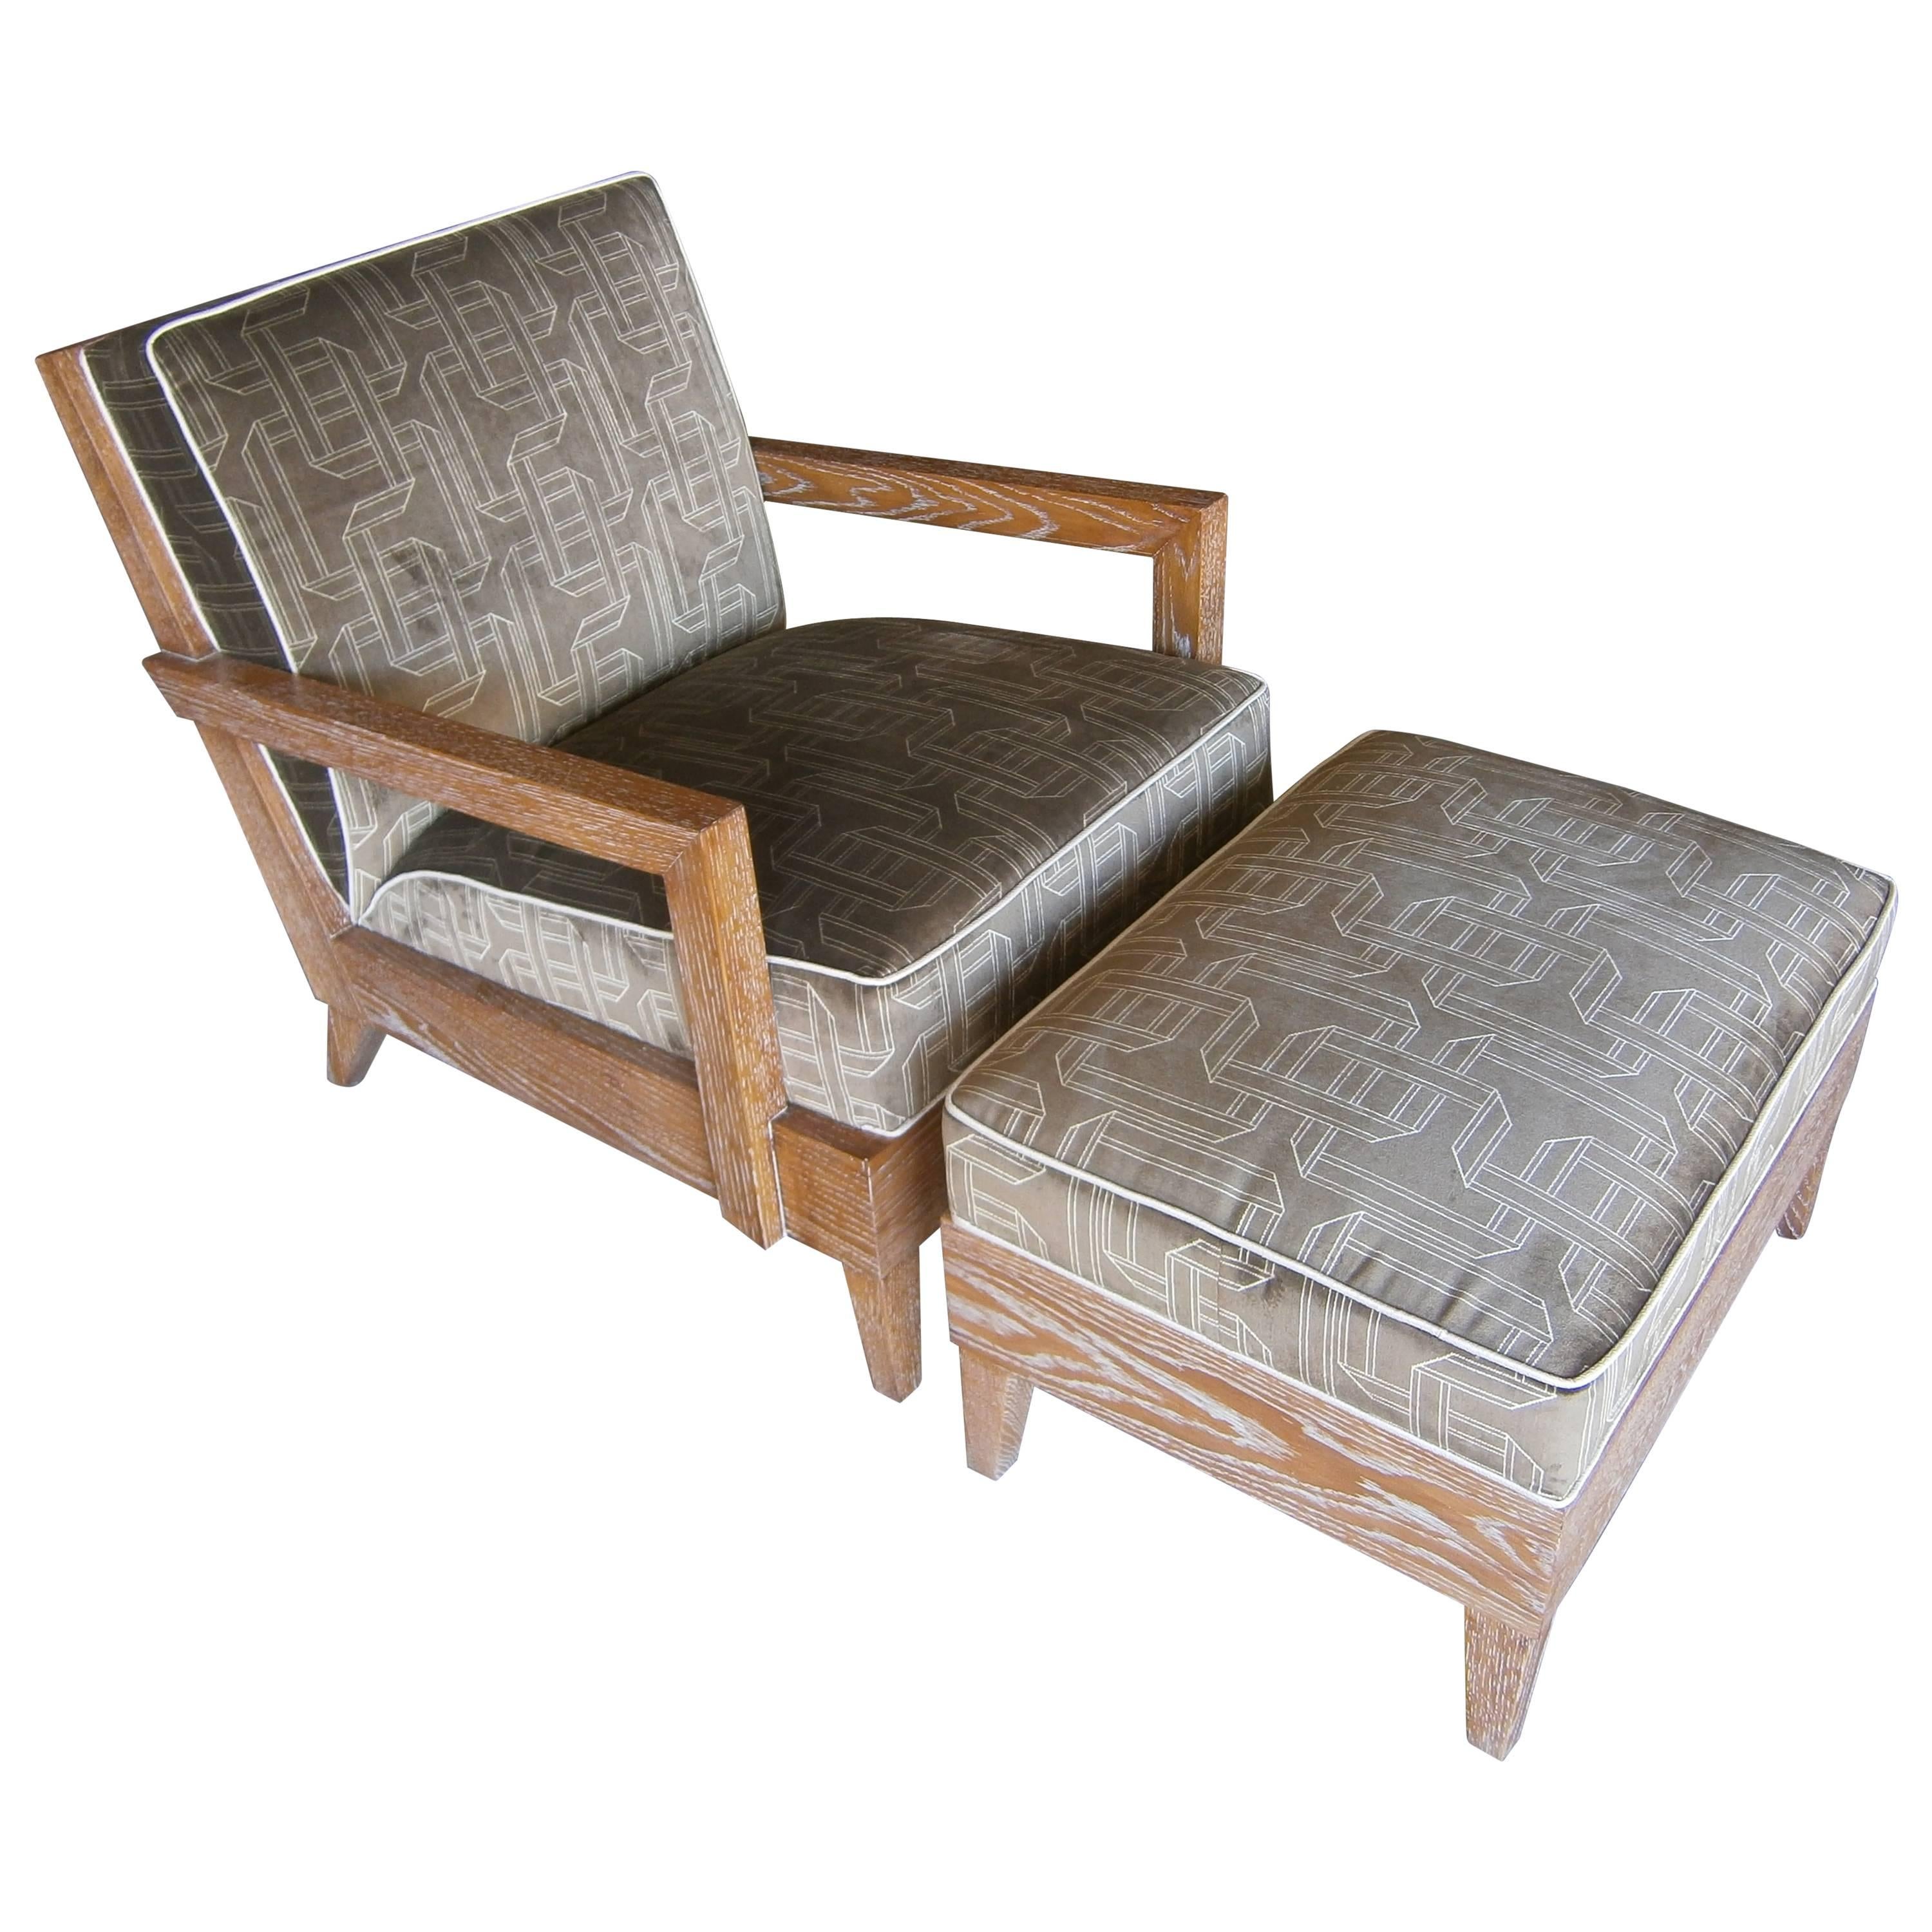 "The Las Palmas Chair & Ottoman" by Christopher Anthony Ltd.